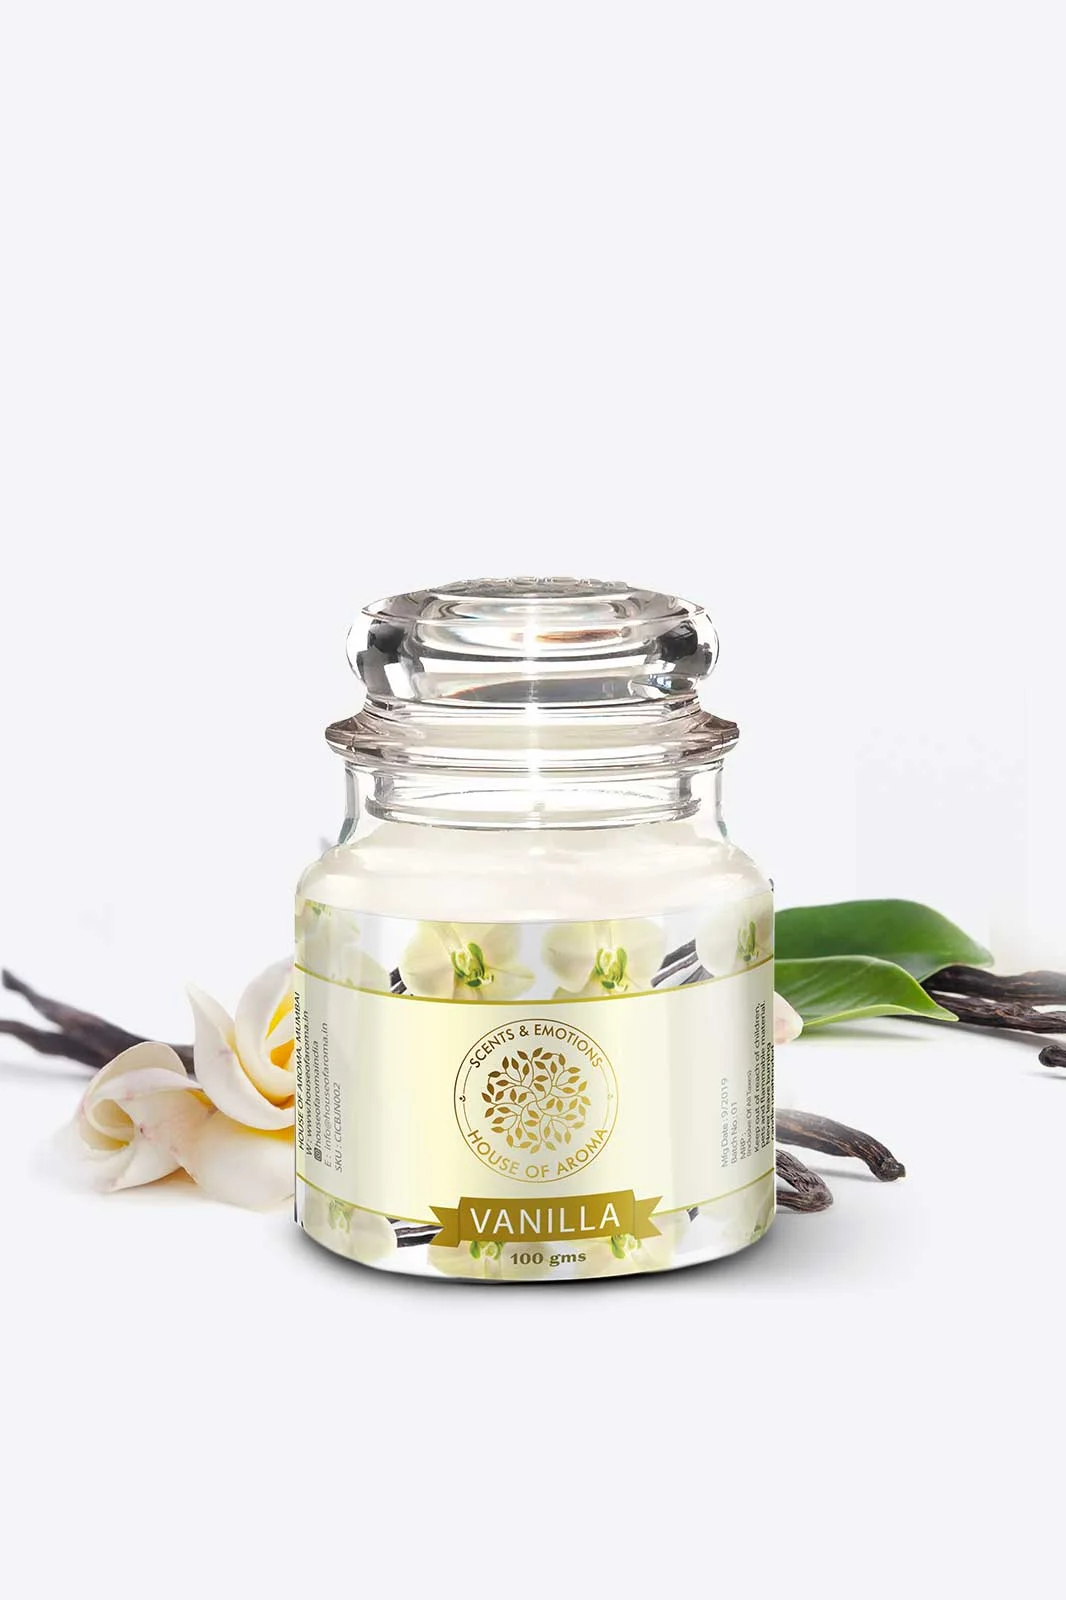 vanilla bell jar candle, scented candle vanilla, vanilla almond candle, vanilla amber candle, vanilla birch candle, vanilla candle amazon, vanilla candle and diffuser set, vanilla candle best, vanilla candle fragrance, vanilla candle gift, House of Aroma, scented candles online, home decor scented candles, organic scented candles, online scented candles, home decor candle, buy scented candles online, room decor candles, best scented candles online, organic candles India, aroma candles online India, organic scents for candles, organic soy candles, natural scented beeswax candles, benefits scented candles, aroma candles buy online, scented candles for home decor, best scents of candles, organic natural scented candles, home decor aroma candles, scented candles order online, organic soy candle wax, best home scented candles, best organic scented candles, organic scented oils, best fragrance scented candles, organic aroma for candles, organic soy for candles, aroma scented candles, scented candle brand, aroma diffuser candle, essential oil for scented candles, aroma candles gift set, best aroma candles in India